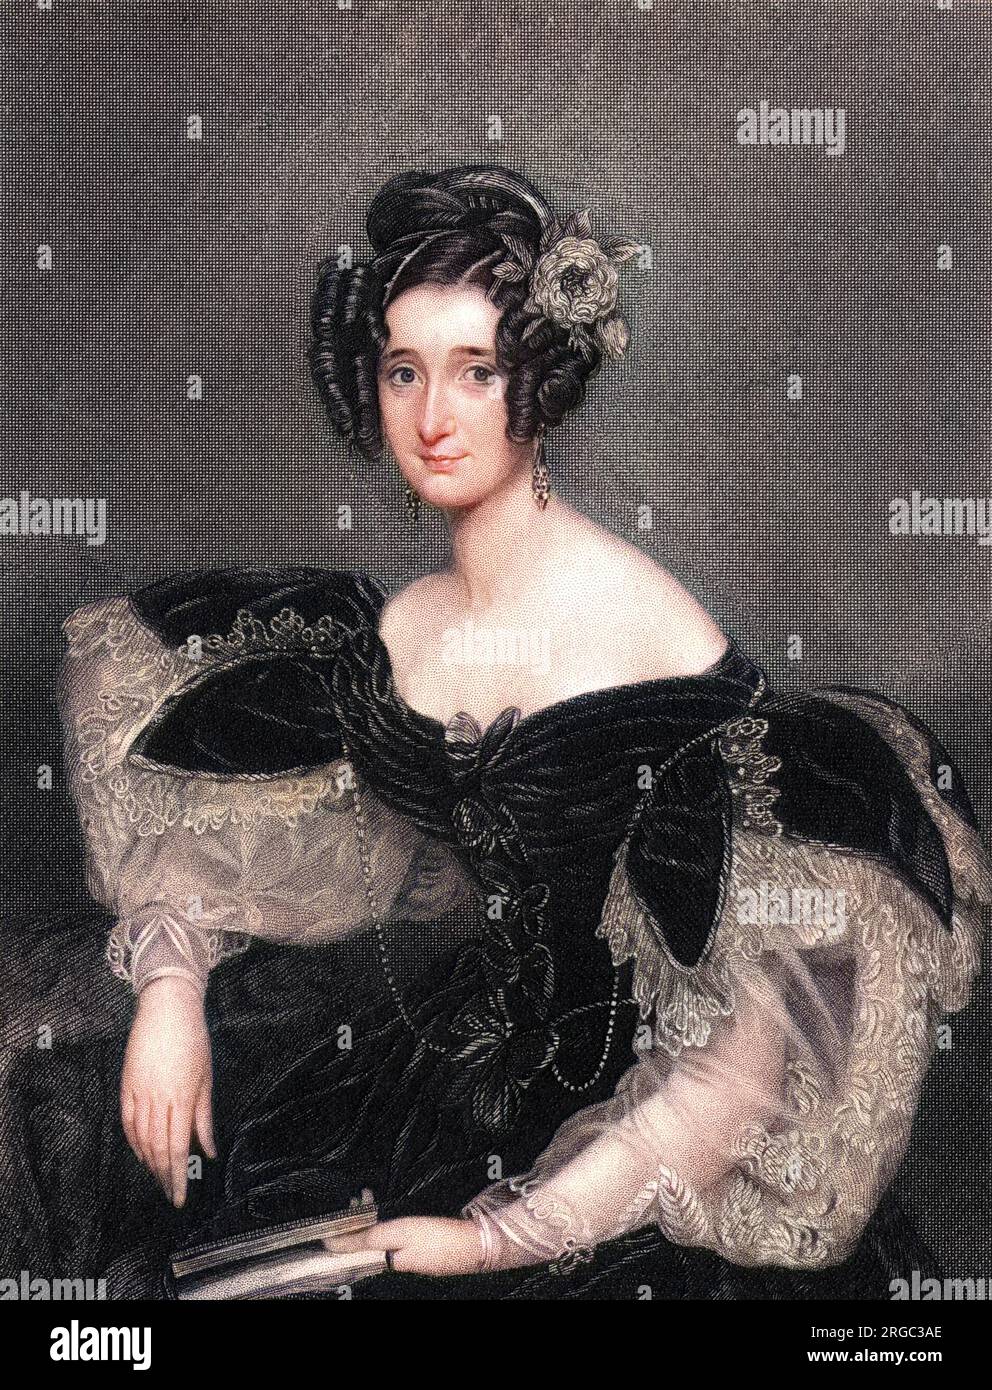 FRANCES IRBY (nee Wright) second wife of Frederick Paul Irby, naval officer - in a ball dress with extravagantly fashionable sleeves. Stock Photo